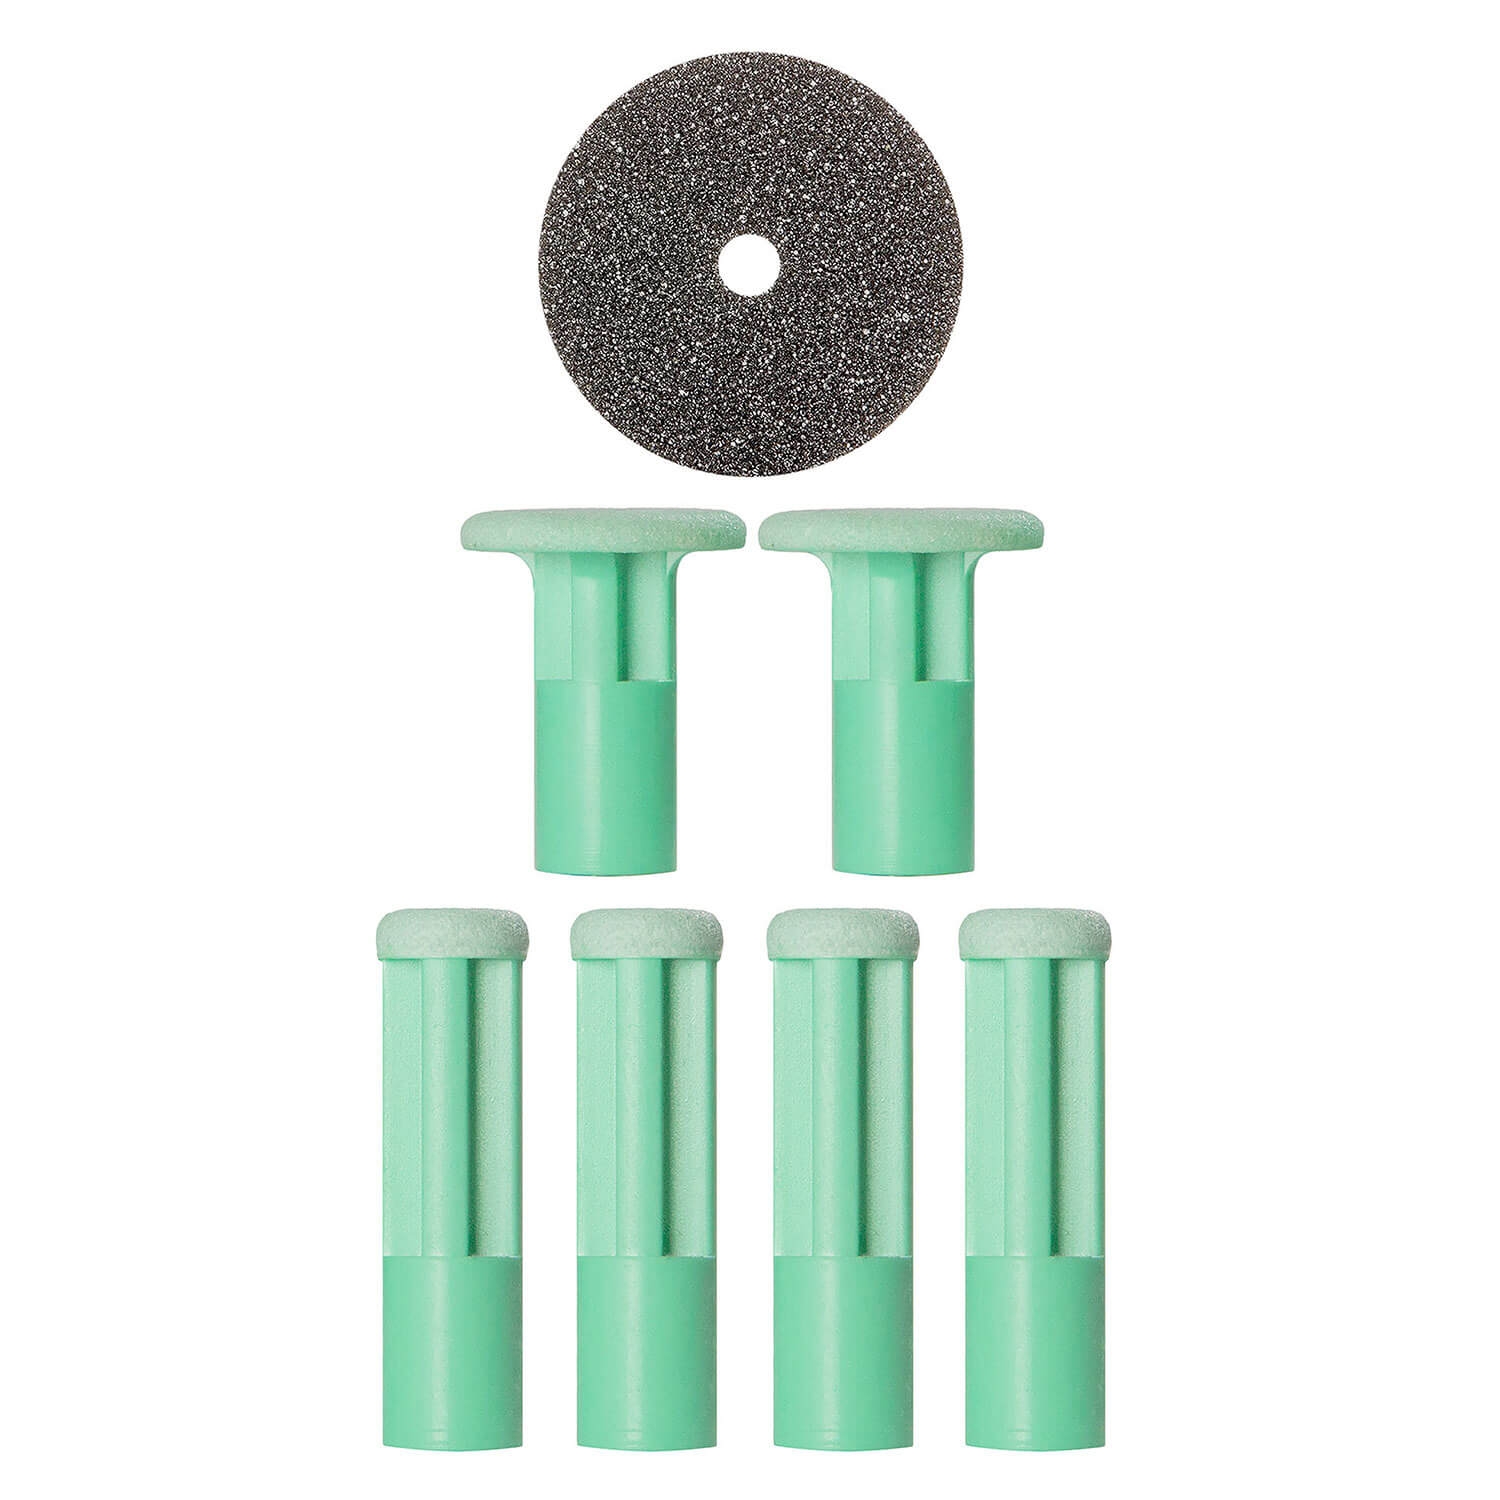 Product image from pmd - Replacement Discs Moderate